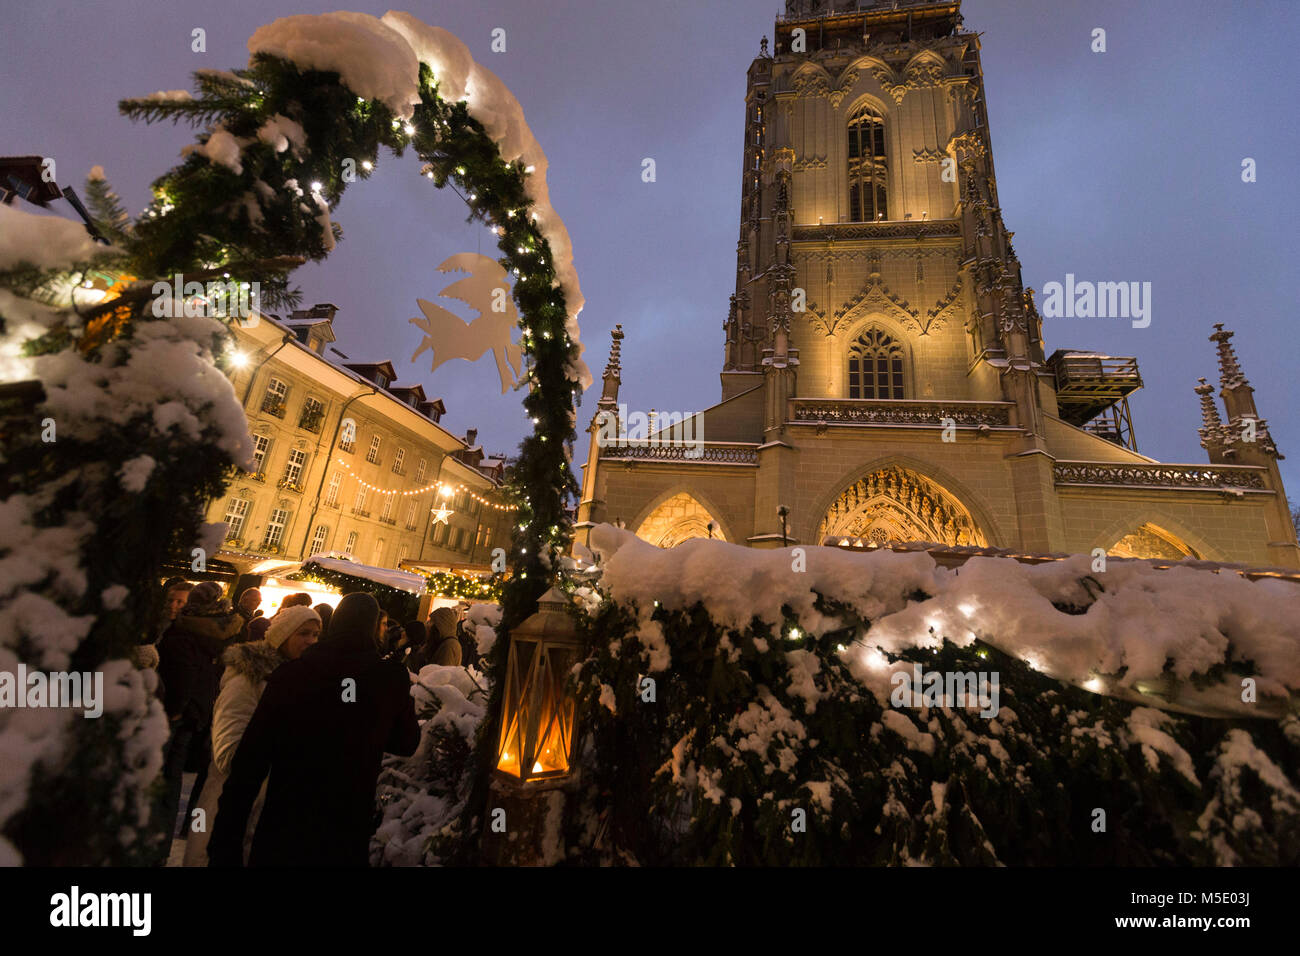 MŸnster, church, night, Christmas fair, winter, snow, lighting, Christmas lighting, curve, Old Town, market stalls, people, tourists, market visitors Stock Photo